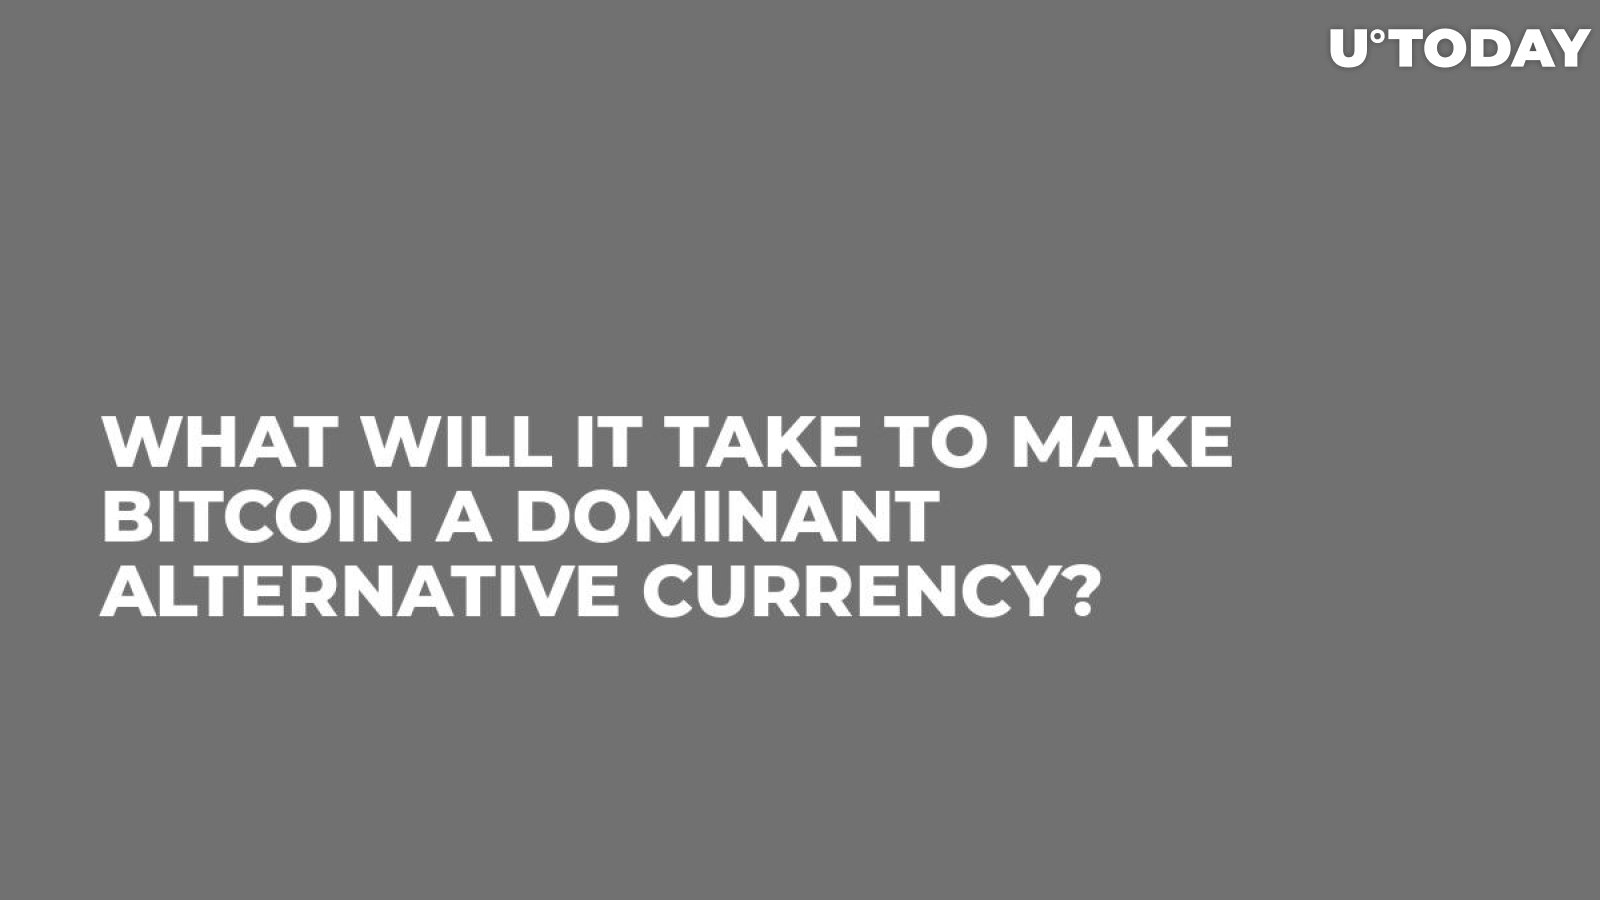 What Will it Take to Make Bitcoin a Dominant Alternative Currency?